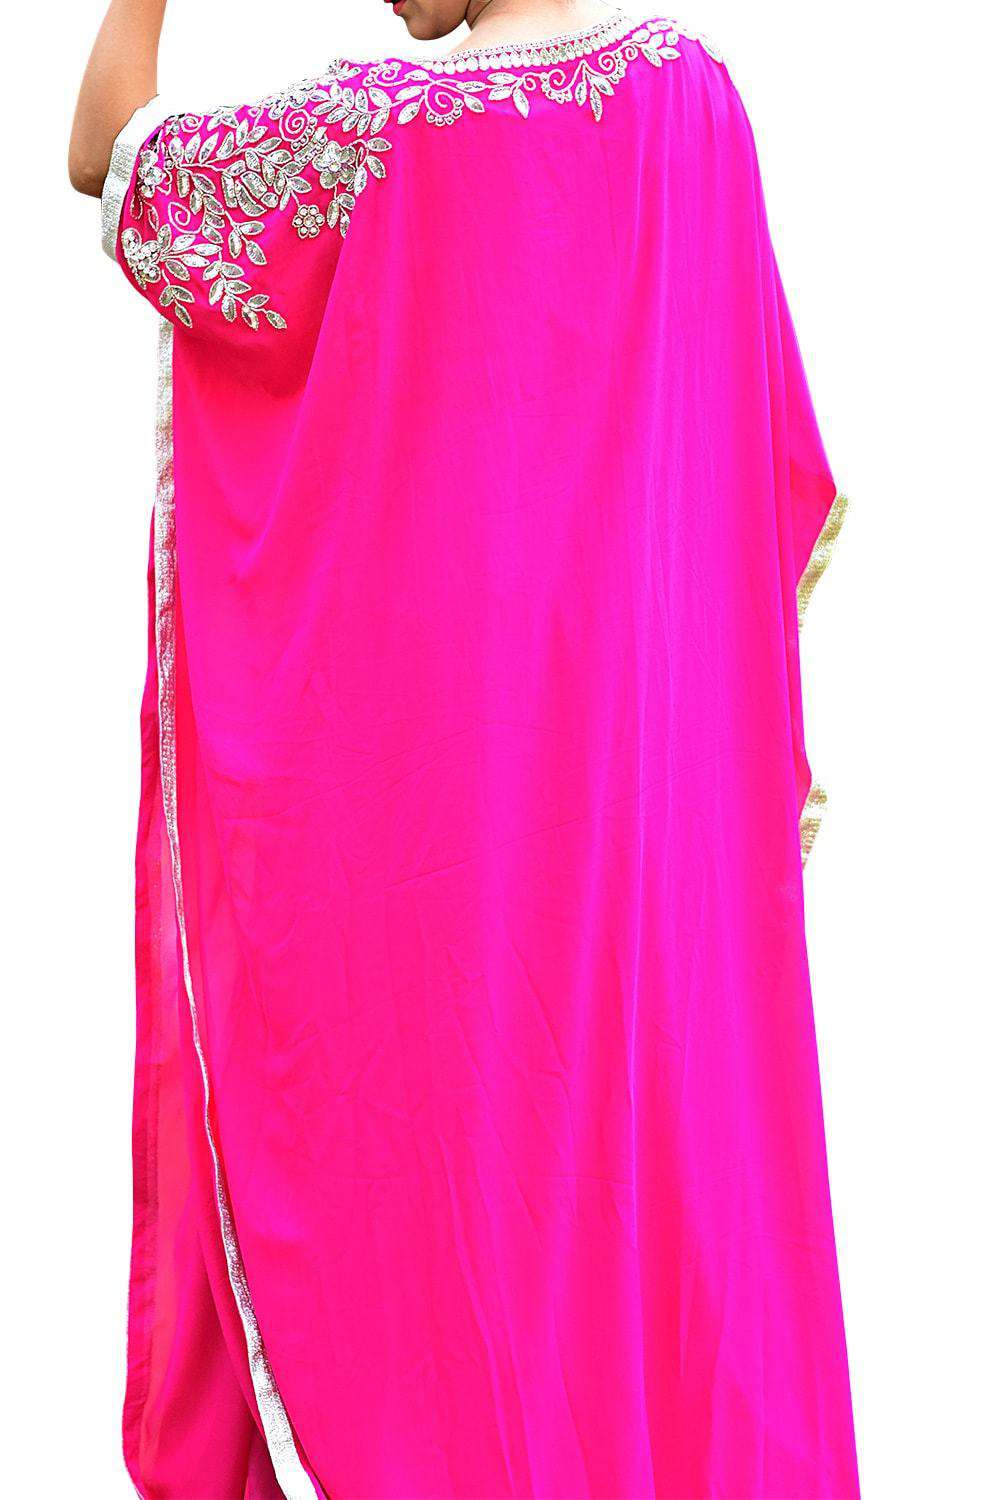 Scintillating Pink Color Georgette Embroidered Kaftan - Free Size